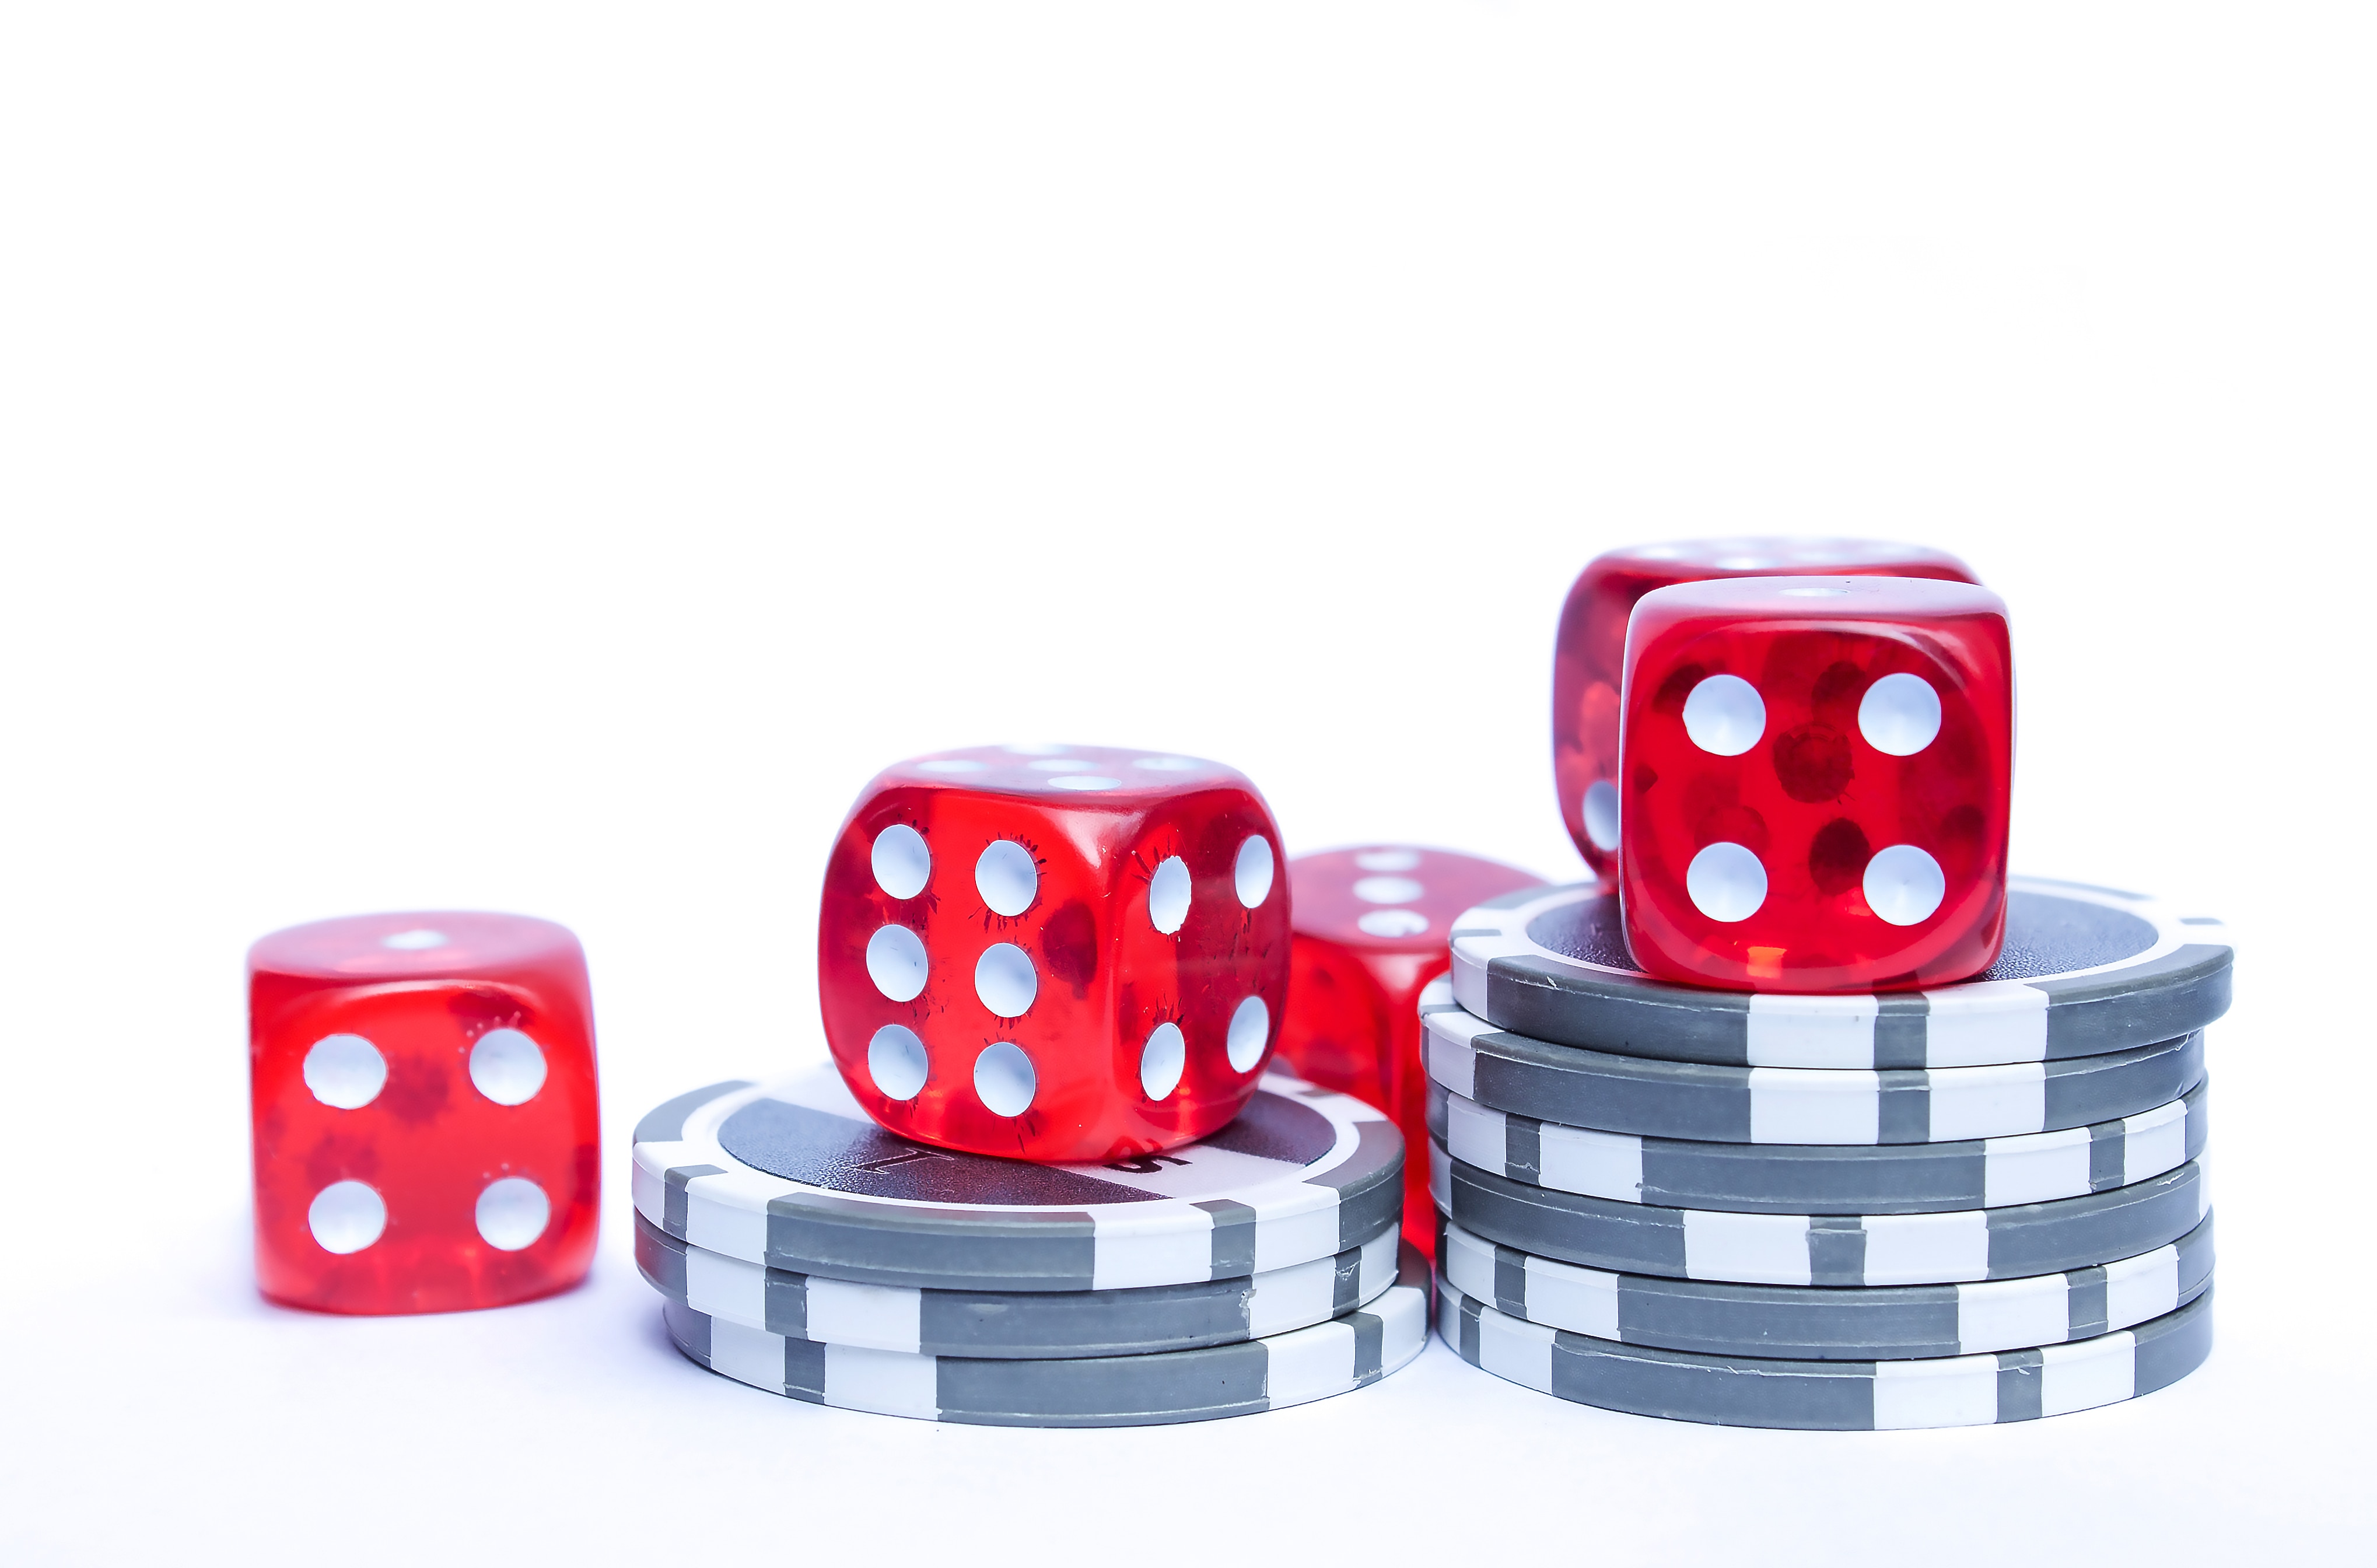 red and white dice and poker chips